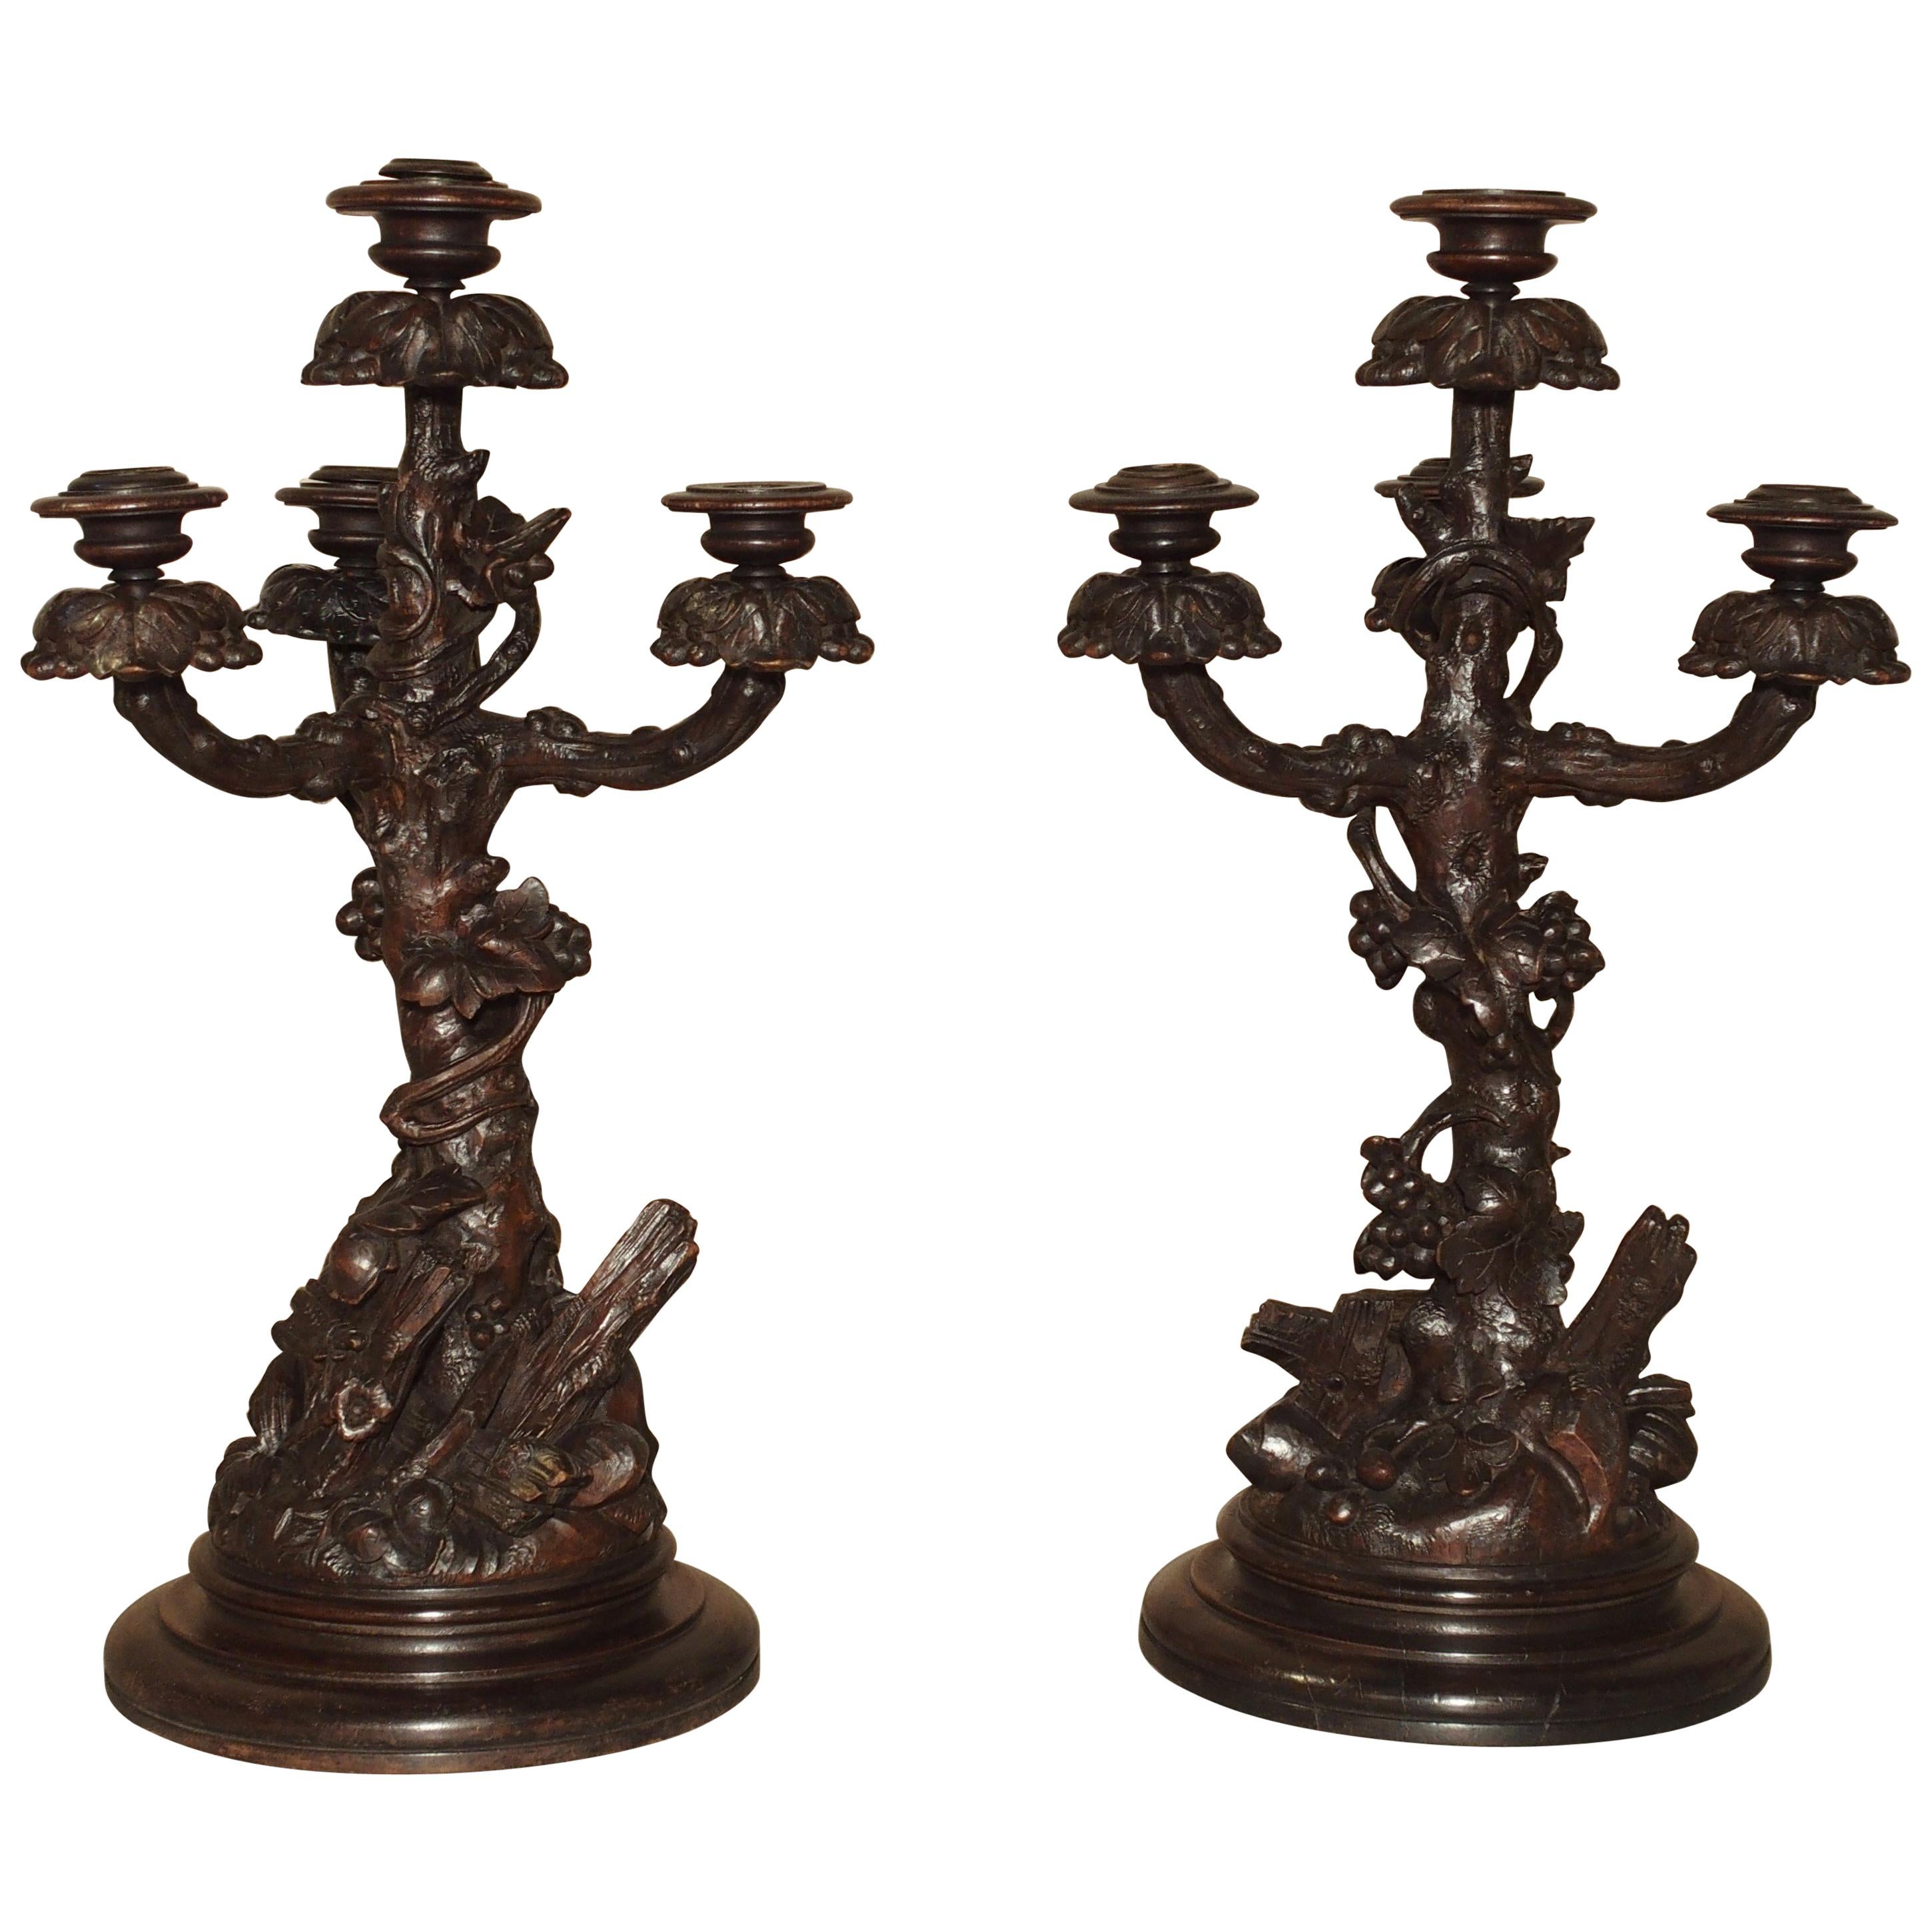 Pair of Unusual 19th Century Black Forest Candelabras